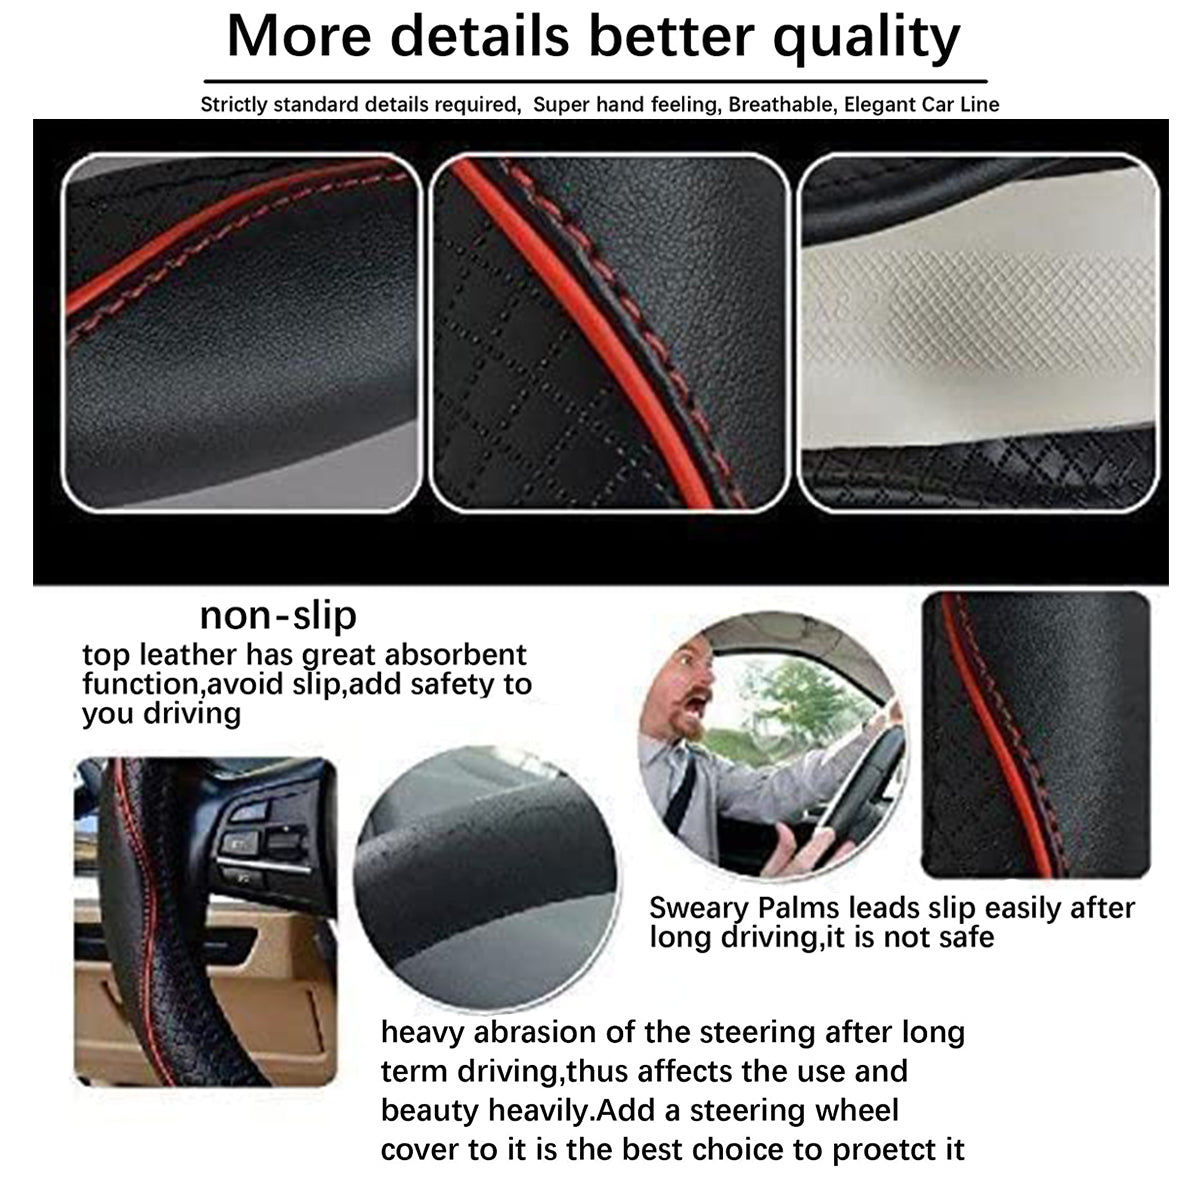 Car Steering Wheel Cover, Custom For Your Cars, Anti-Slip, Safety, Soft, Breathable, Heavy Duty, Thick, Full Surround, Sports Style, Car Accessories LM18990